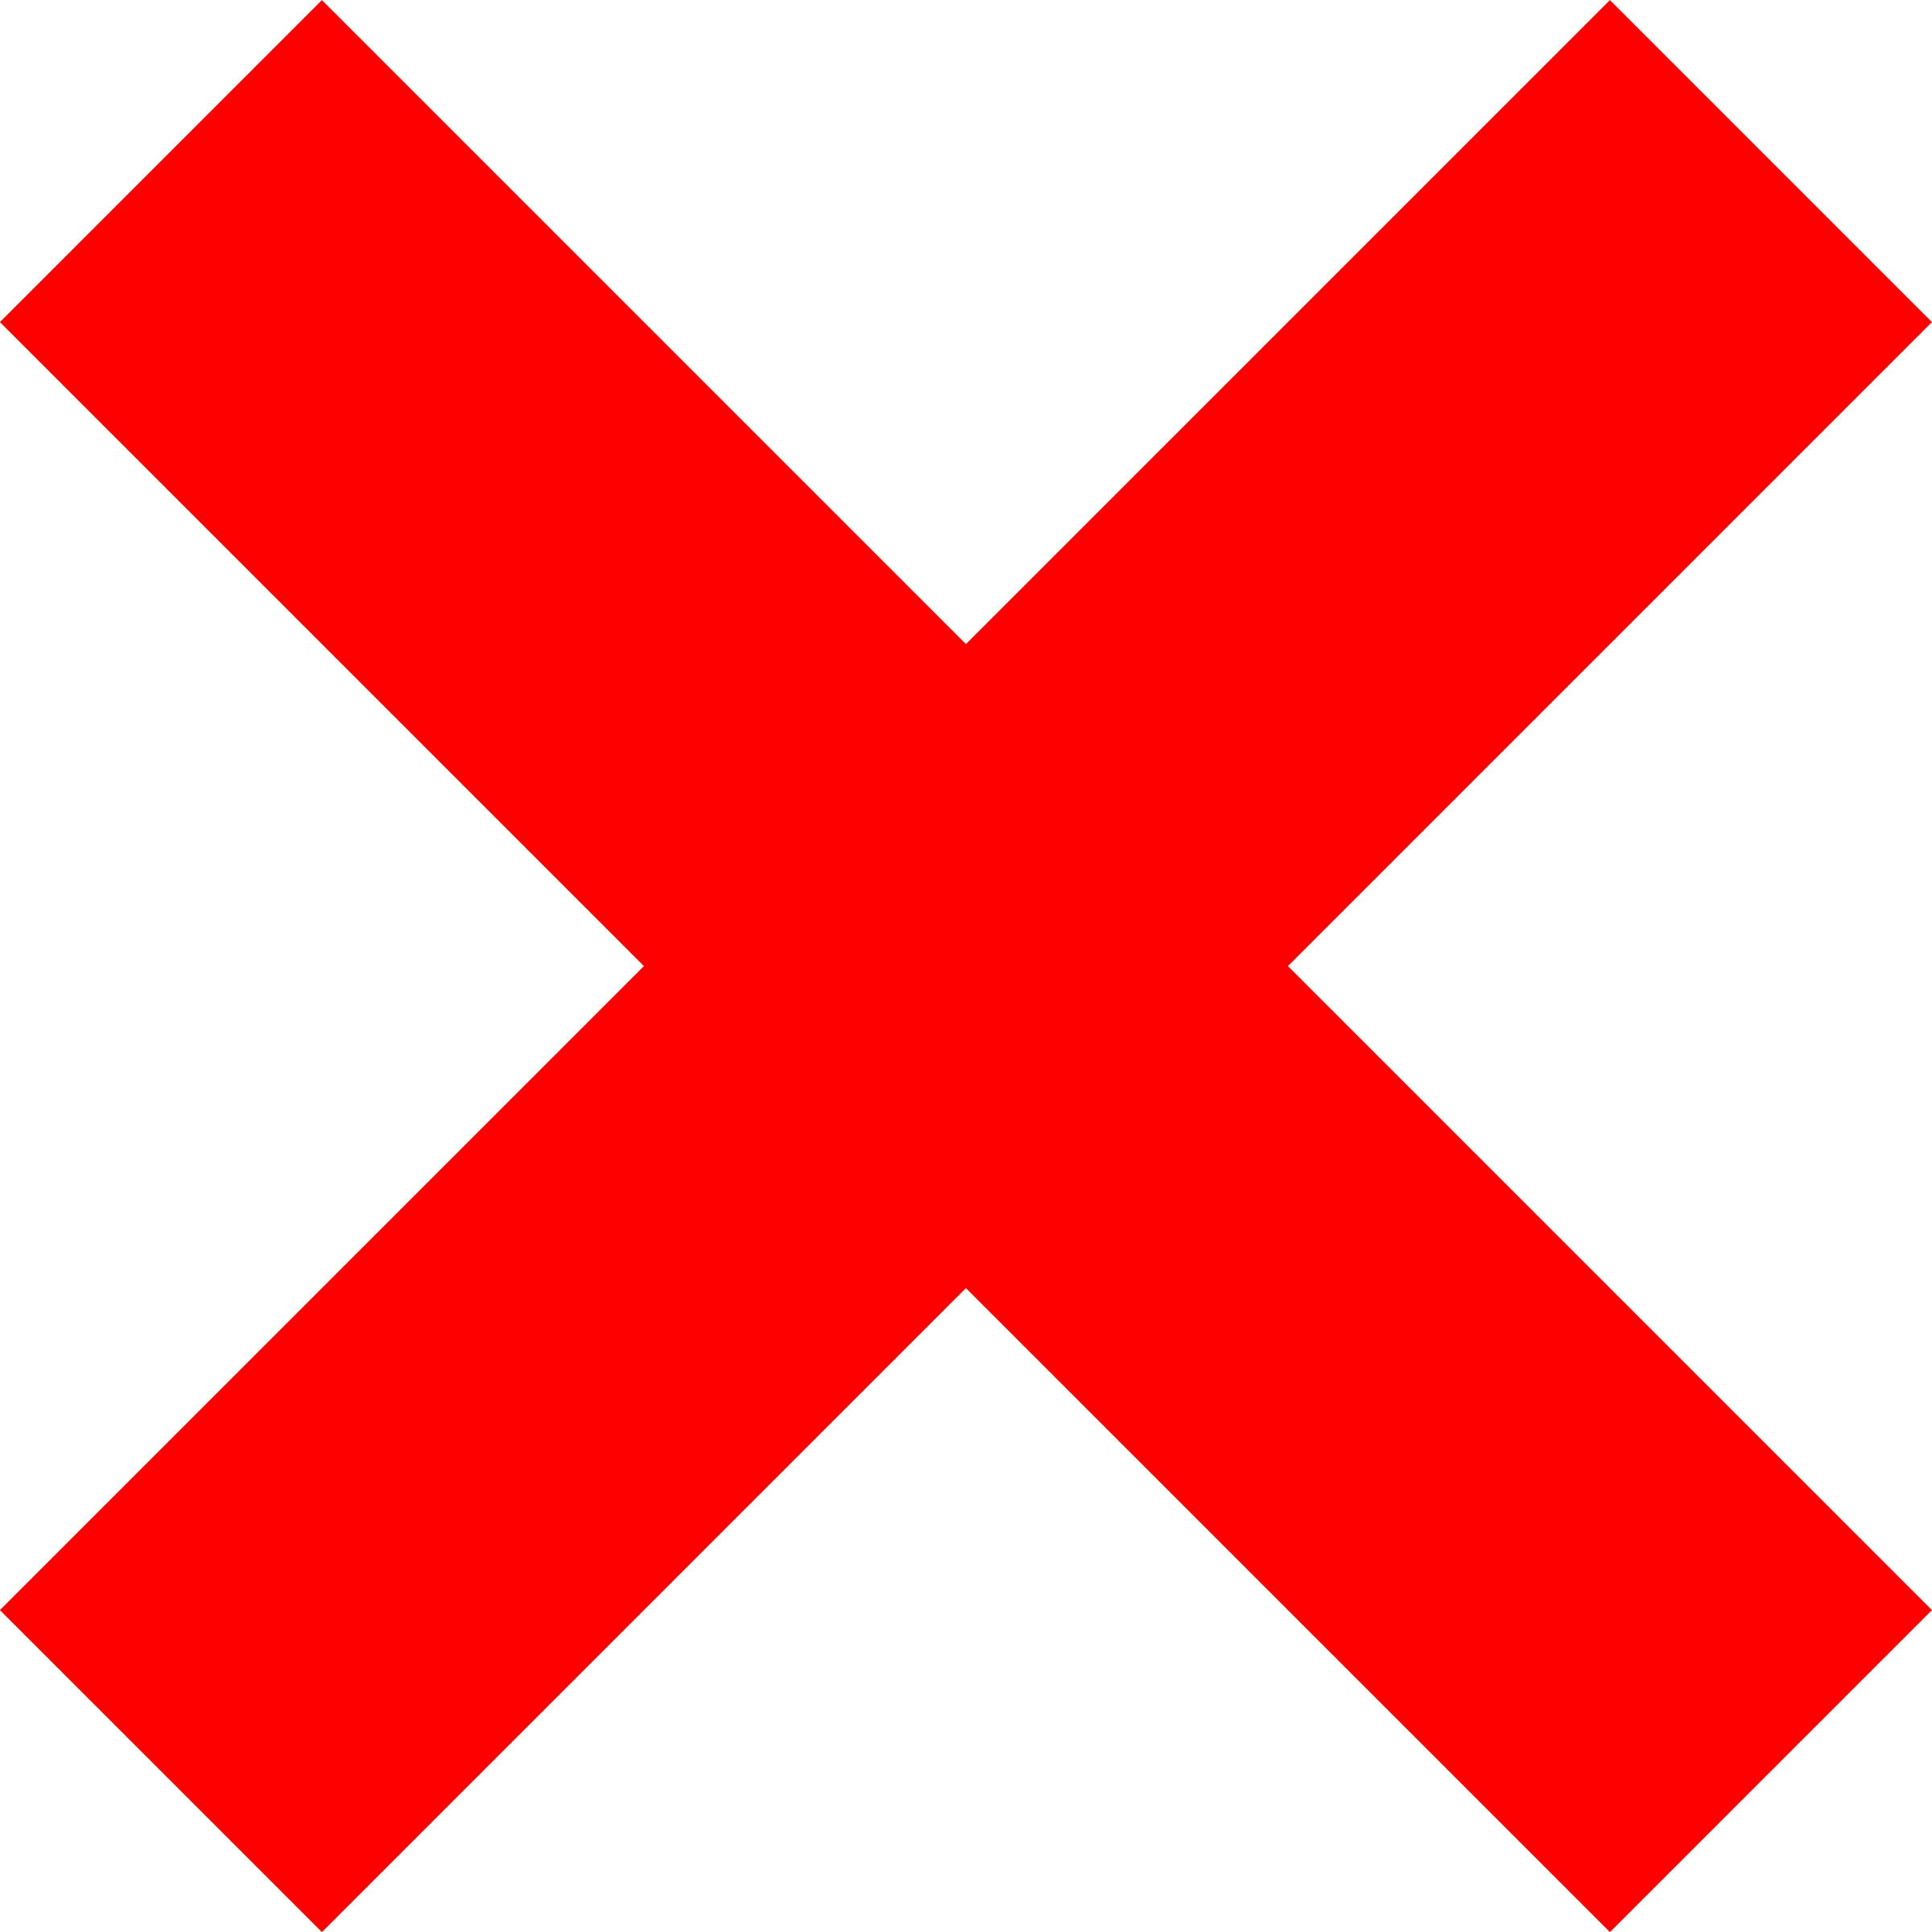 Red X PNG Image HD